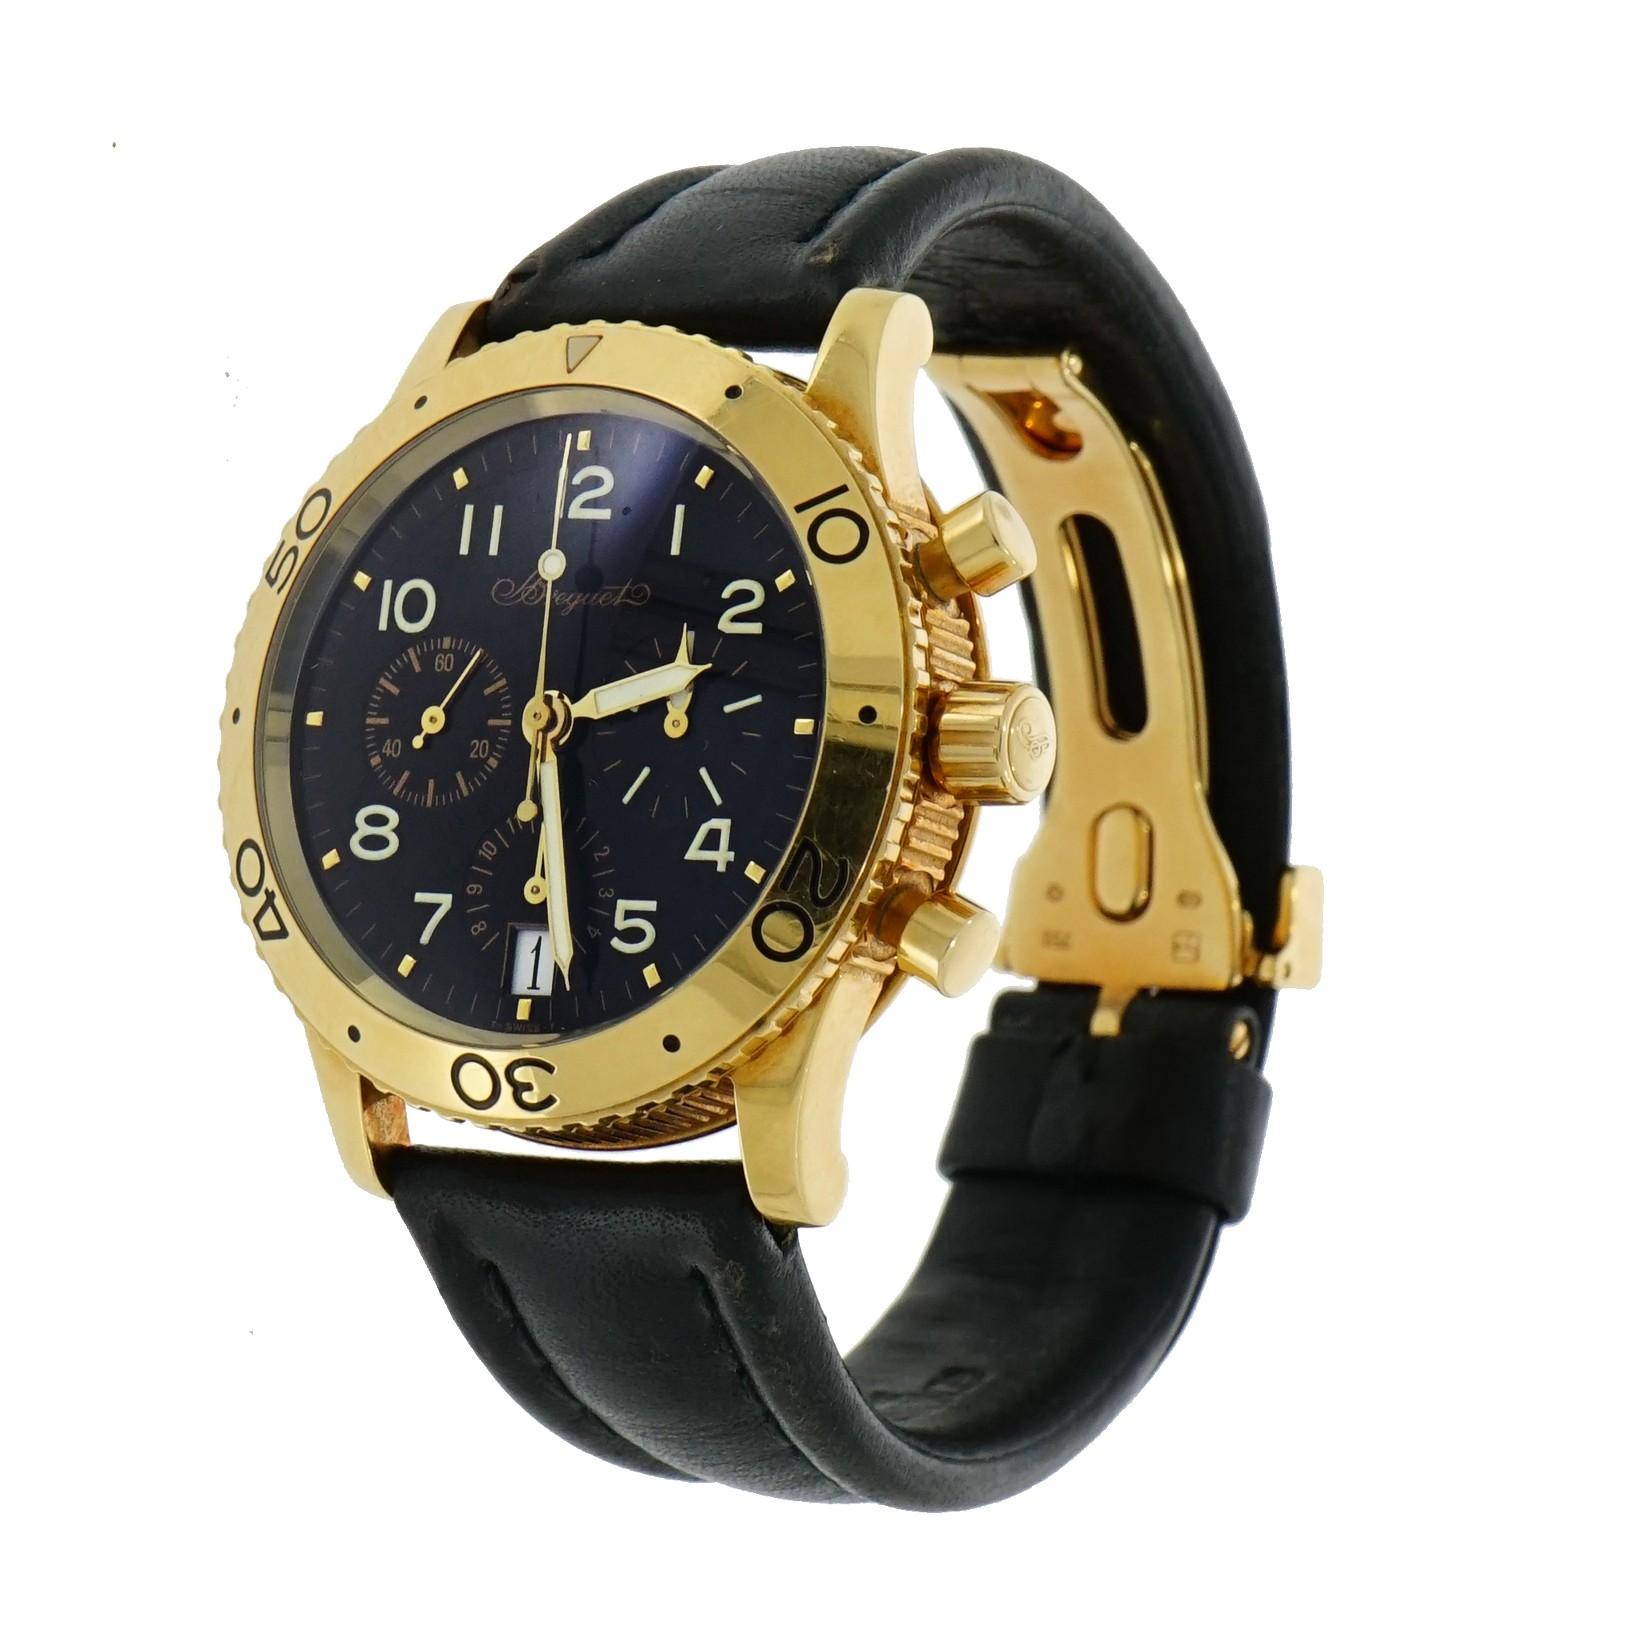 Pre-owned in good condition Breguet Type XX Transatlantique  chronograph in 18 karat  yellow gold case, polished finish 60 minutes bezel, automatic self-winding movement, caliber 582Q, 48 hours of power reserve, black dial with Arabic numerals hour